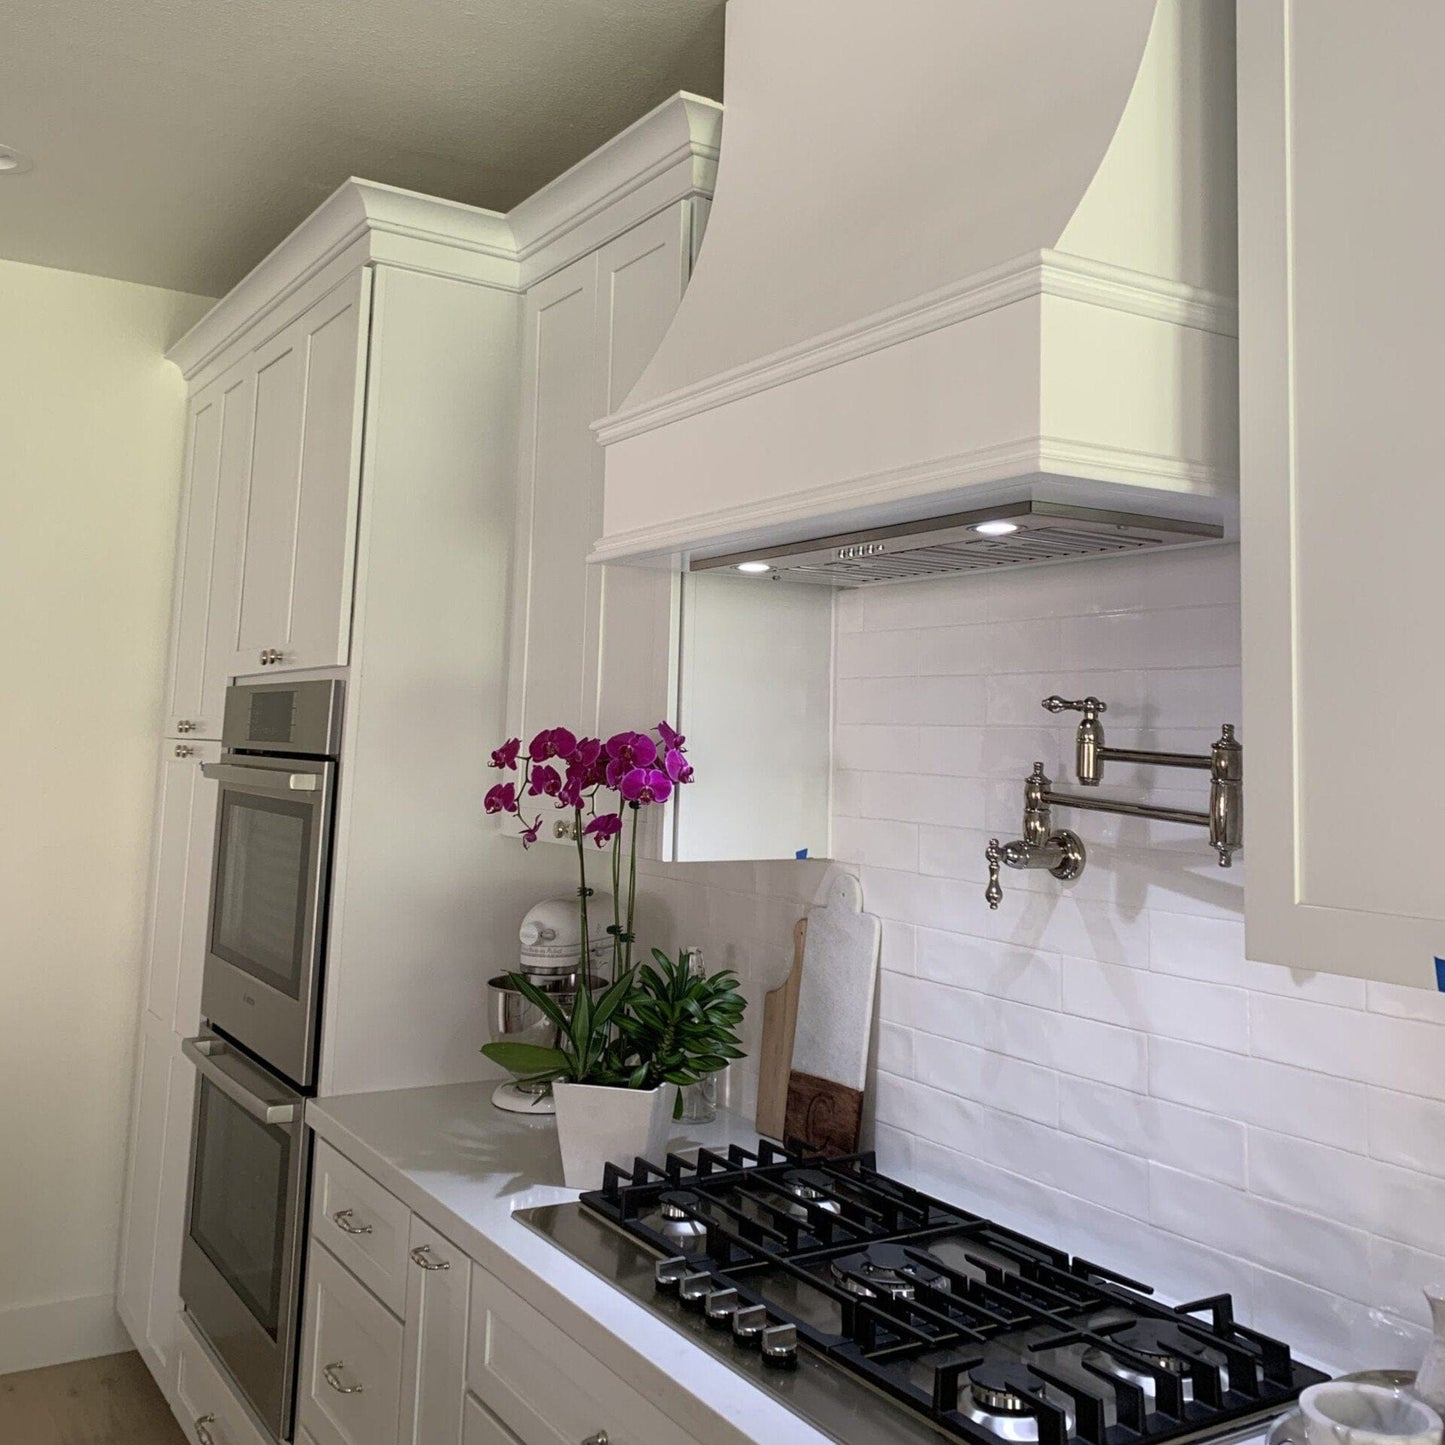 Riley & Higgs Unfinished Wood Range Hood With Sloped Strapped Front and Decorative Trim - 30", 36", 42", 48", 54" and 60" Widths Available